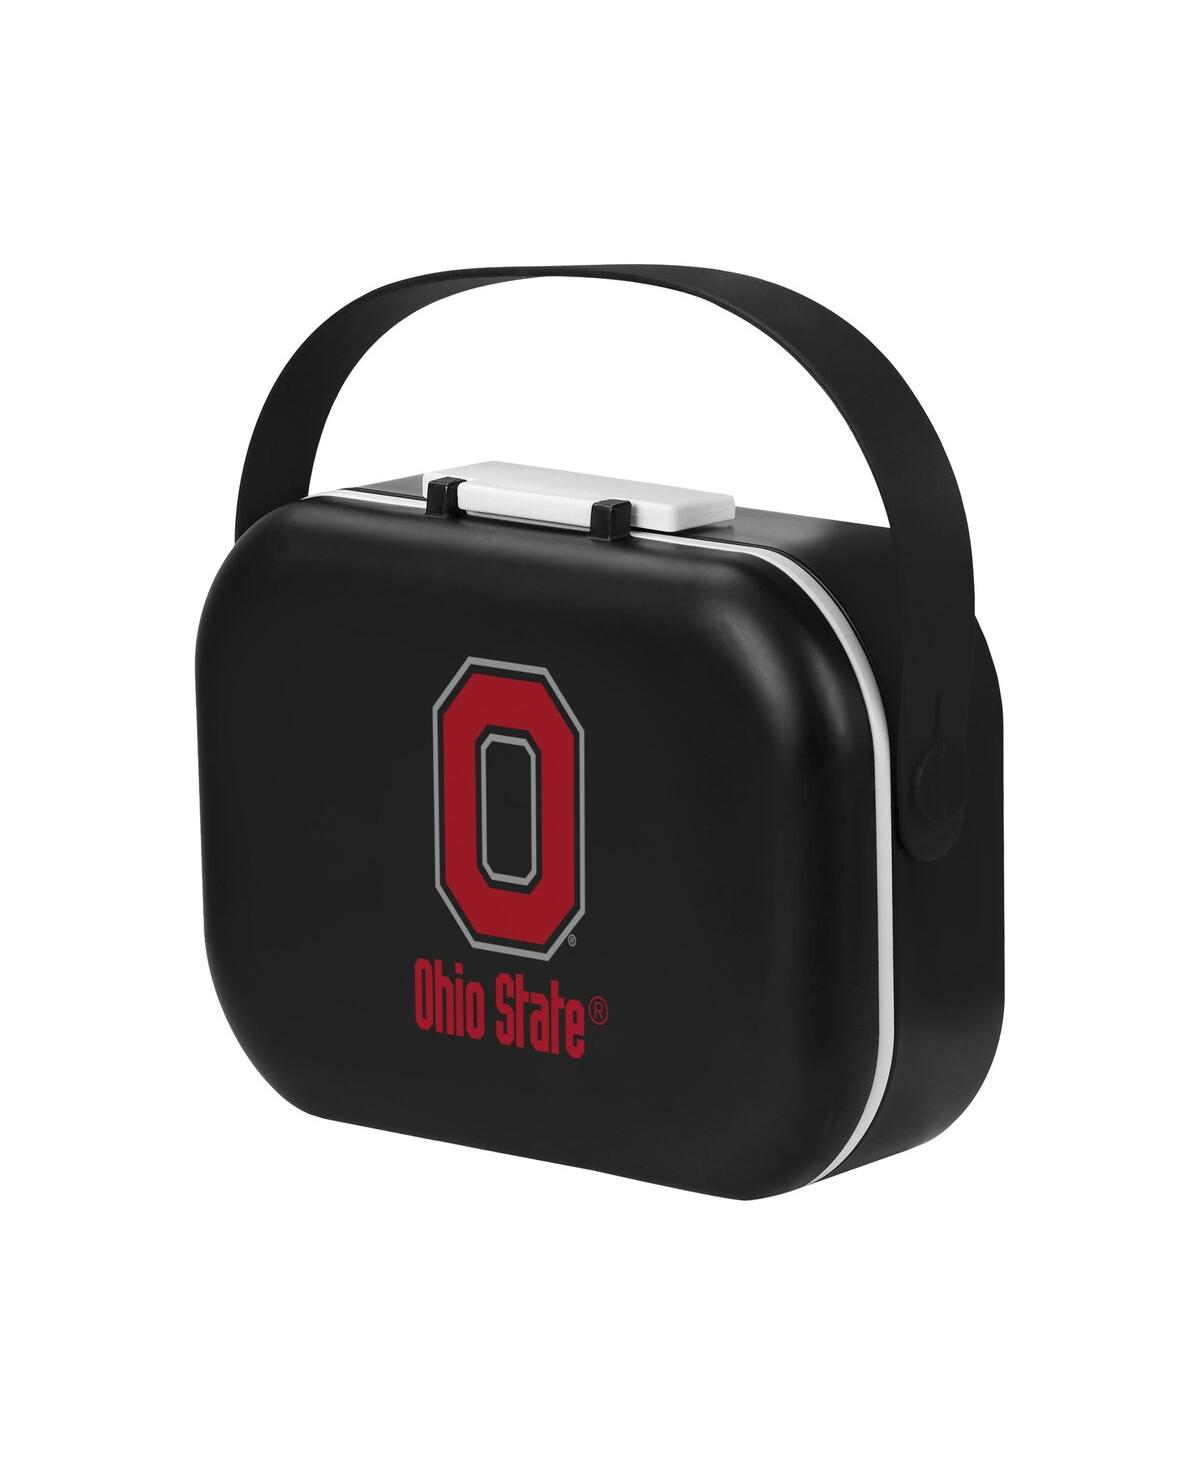 Foco Ohio State Buckeyes Hard Shell Compartment Lunch Box In Black